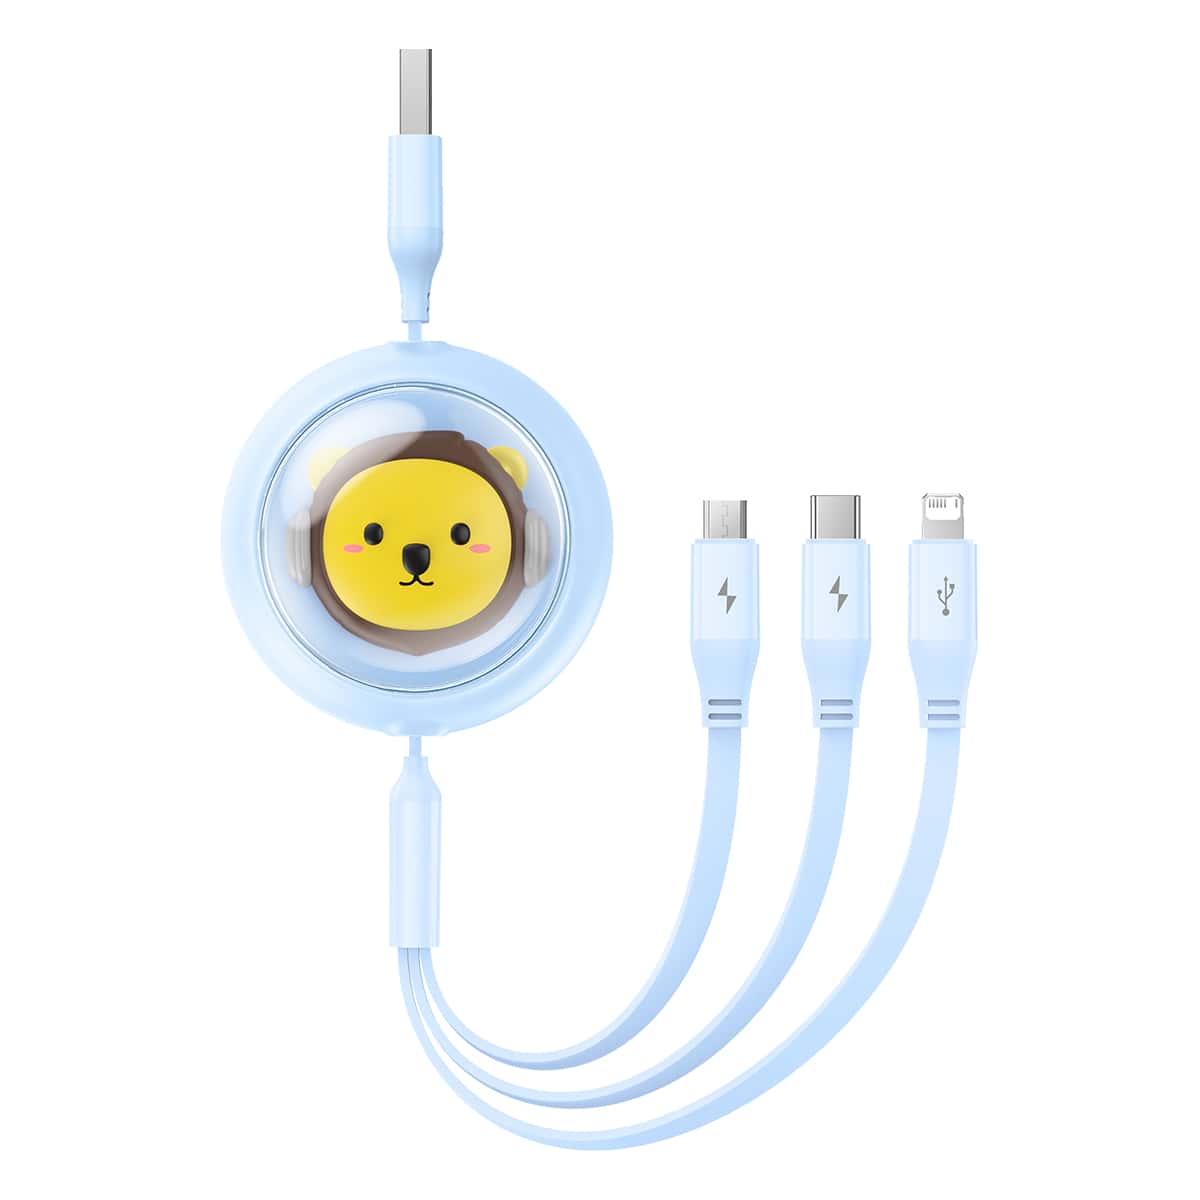 Baseus Leo Retractable Charging Cable 3-in-1 USB to M+L+C 3.5A 1.1m